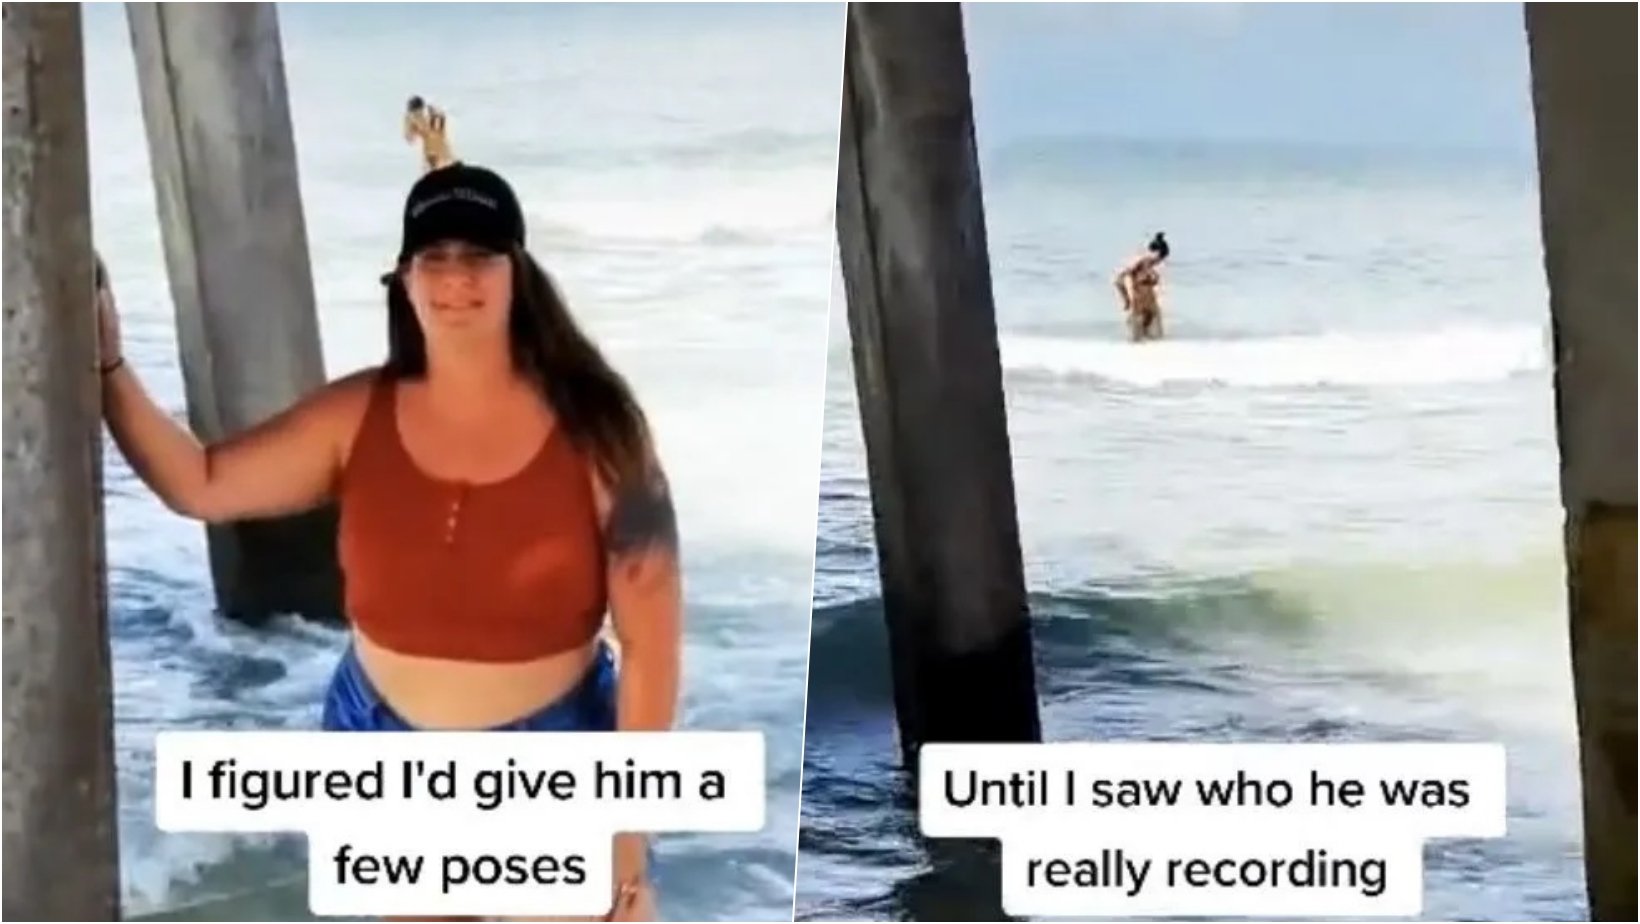 6 facebook cover 41.jpg?resize=412,275 - Newlywed Wife Was Left Horrified After Discovering Her Husband Filming Another Woman In A Bikini During Their Honeymoon Getaway